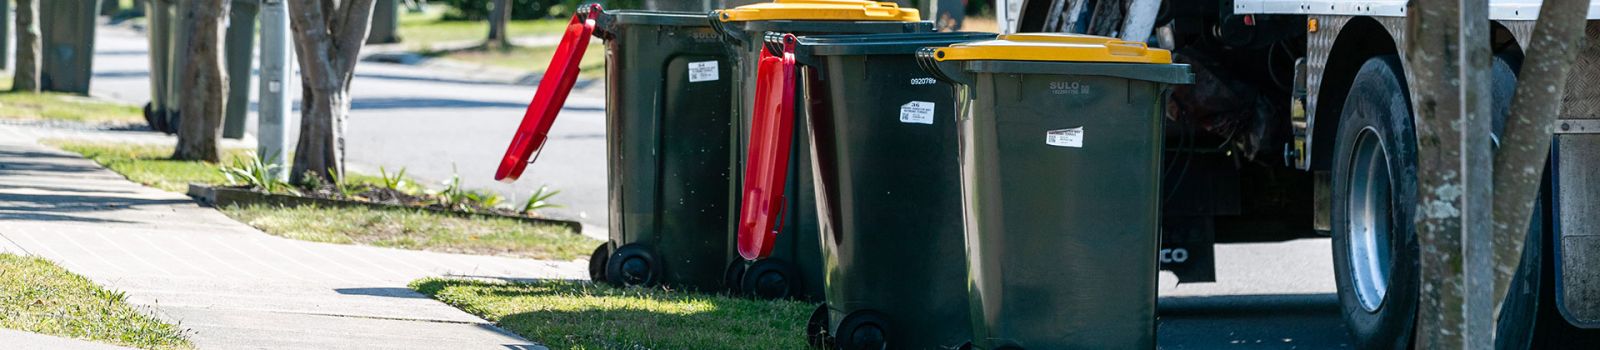 Image of different coloured bins and a garbage truck  banner image